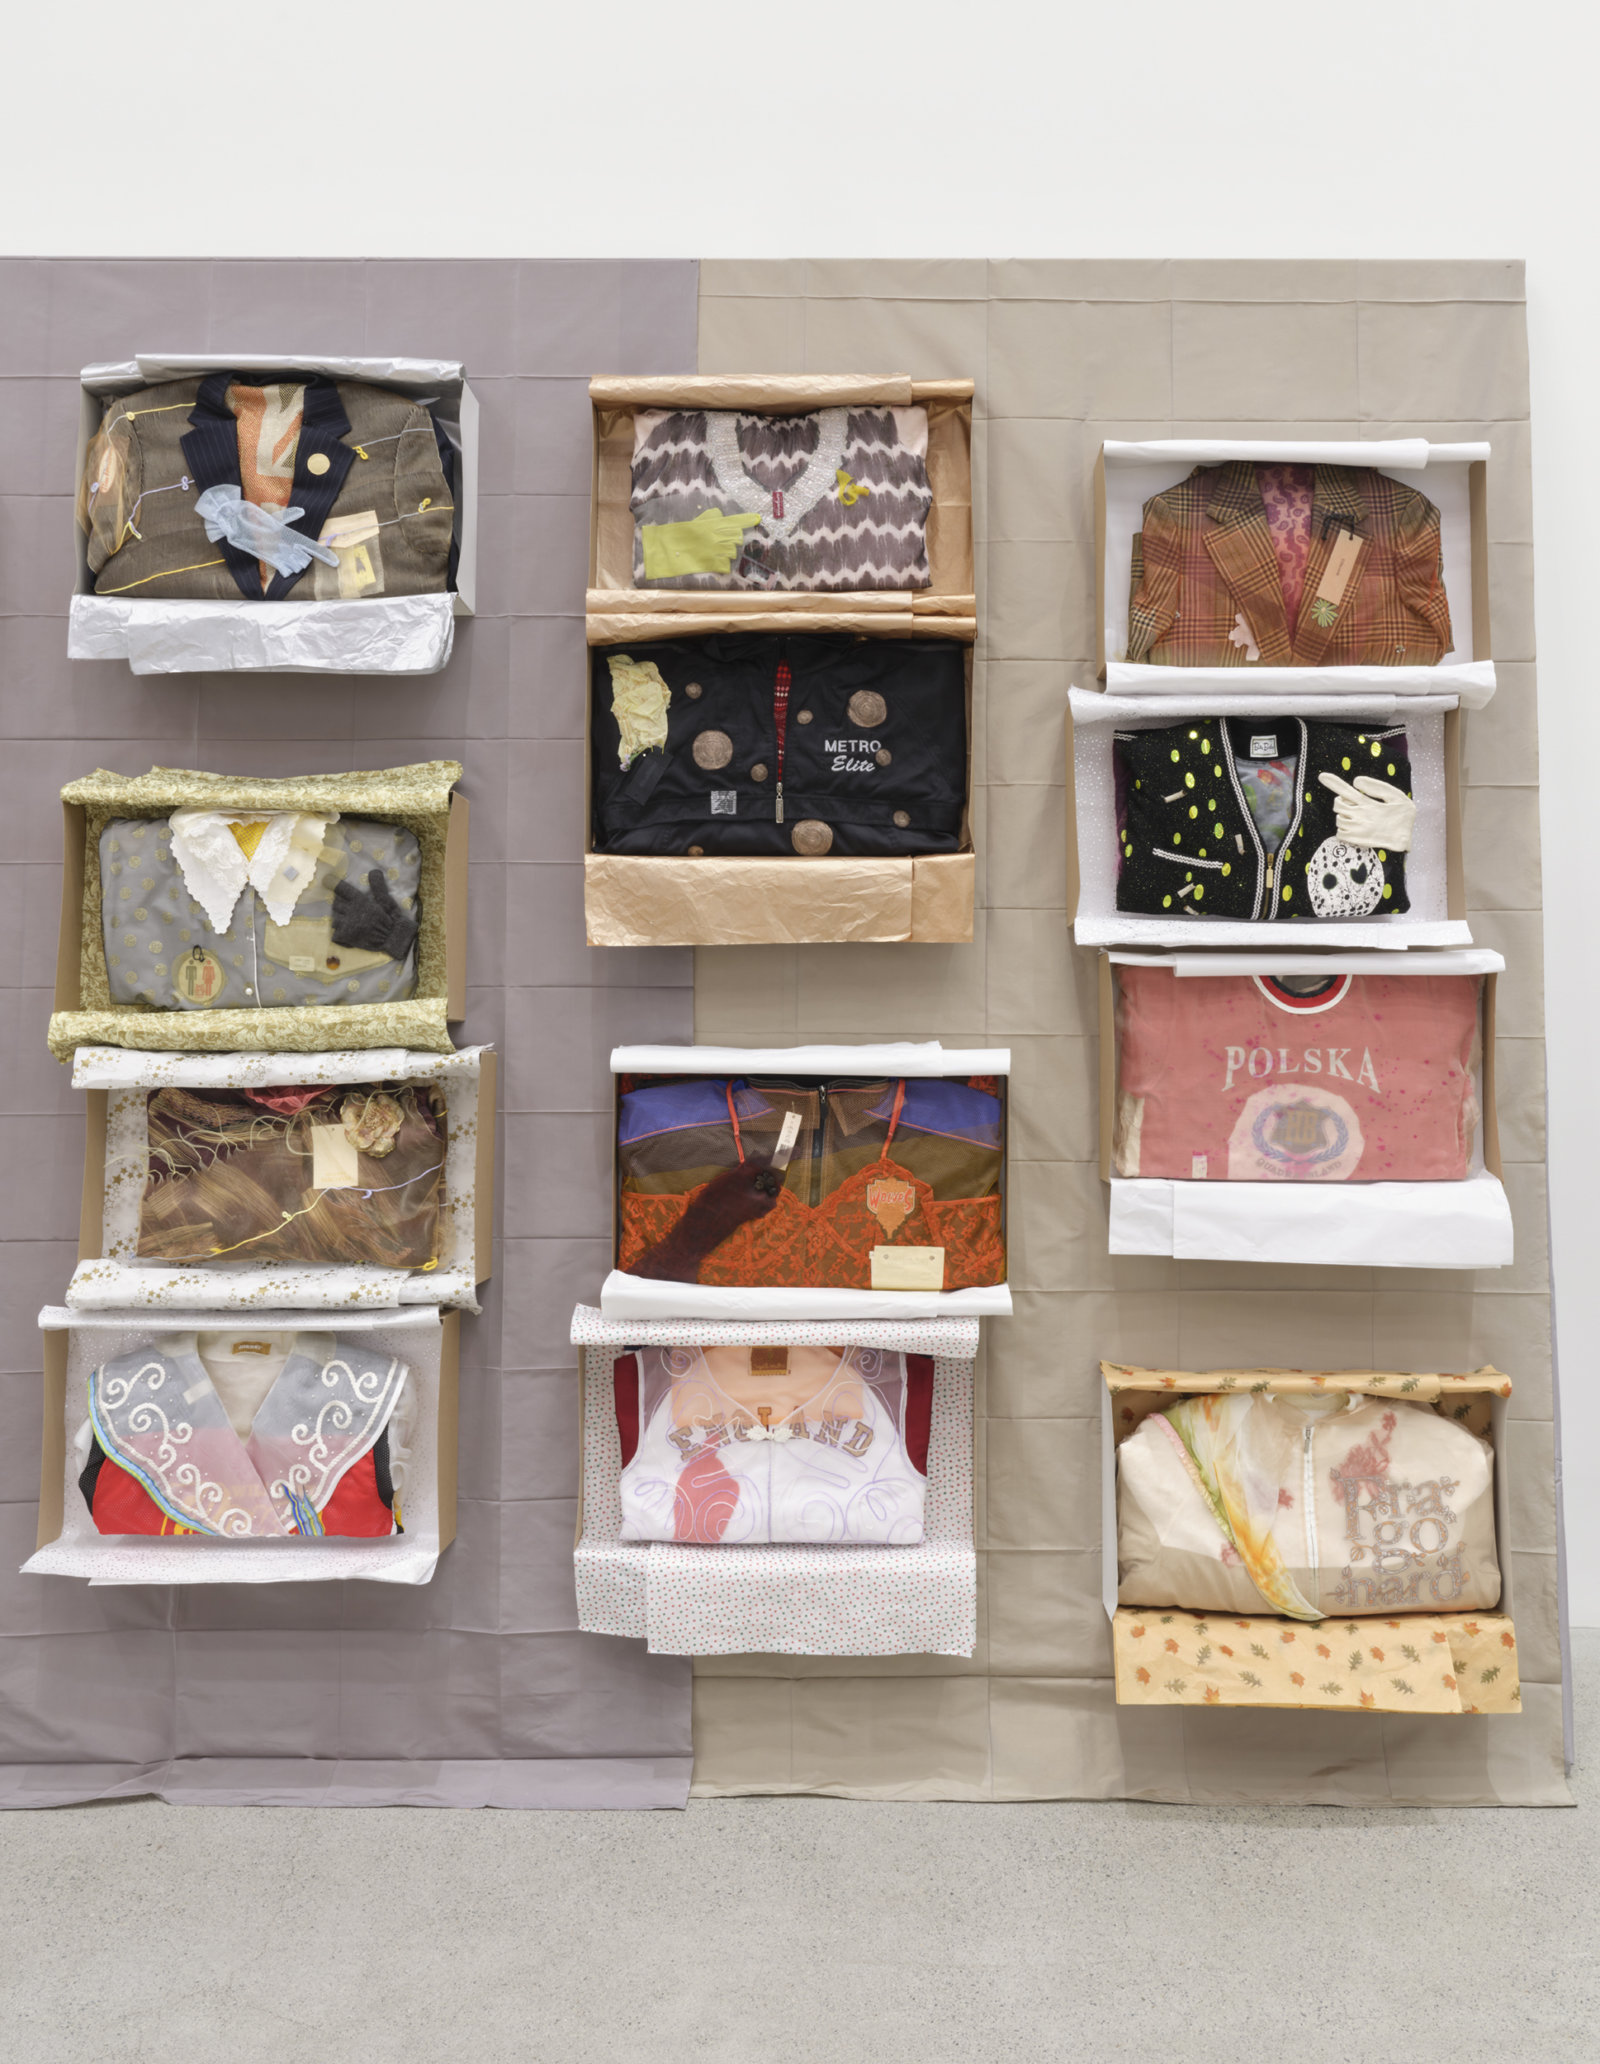 Liz Magor, Being This (detail), 2012/2022, paper, textiles, found materials, 96 x 432 x 22 in. (244 x 1097 x 56 cm)